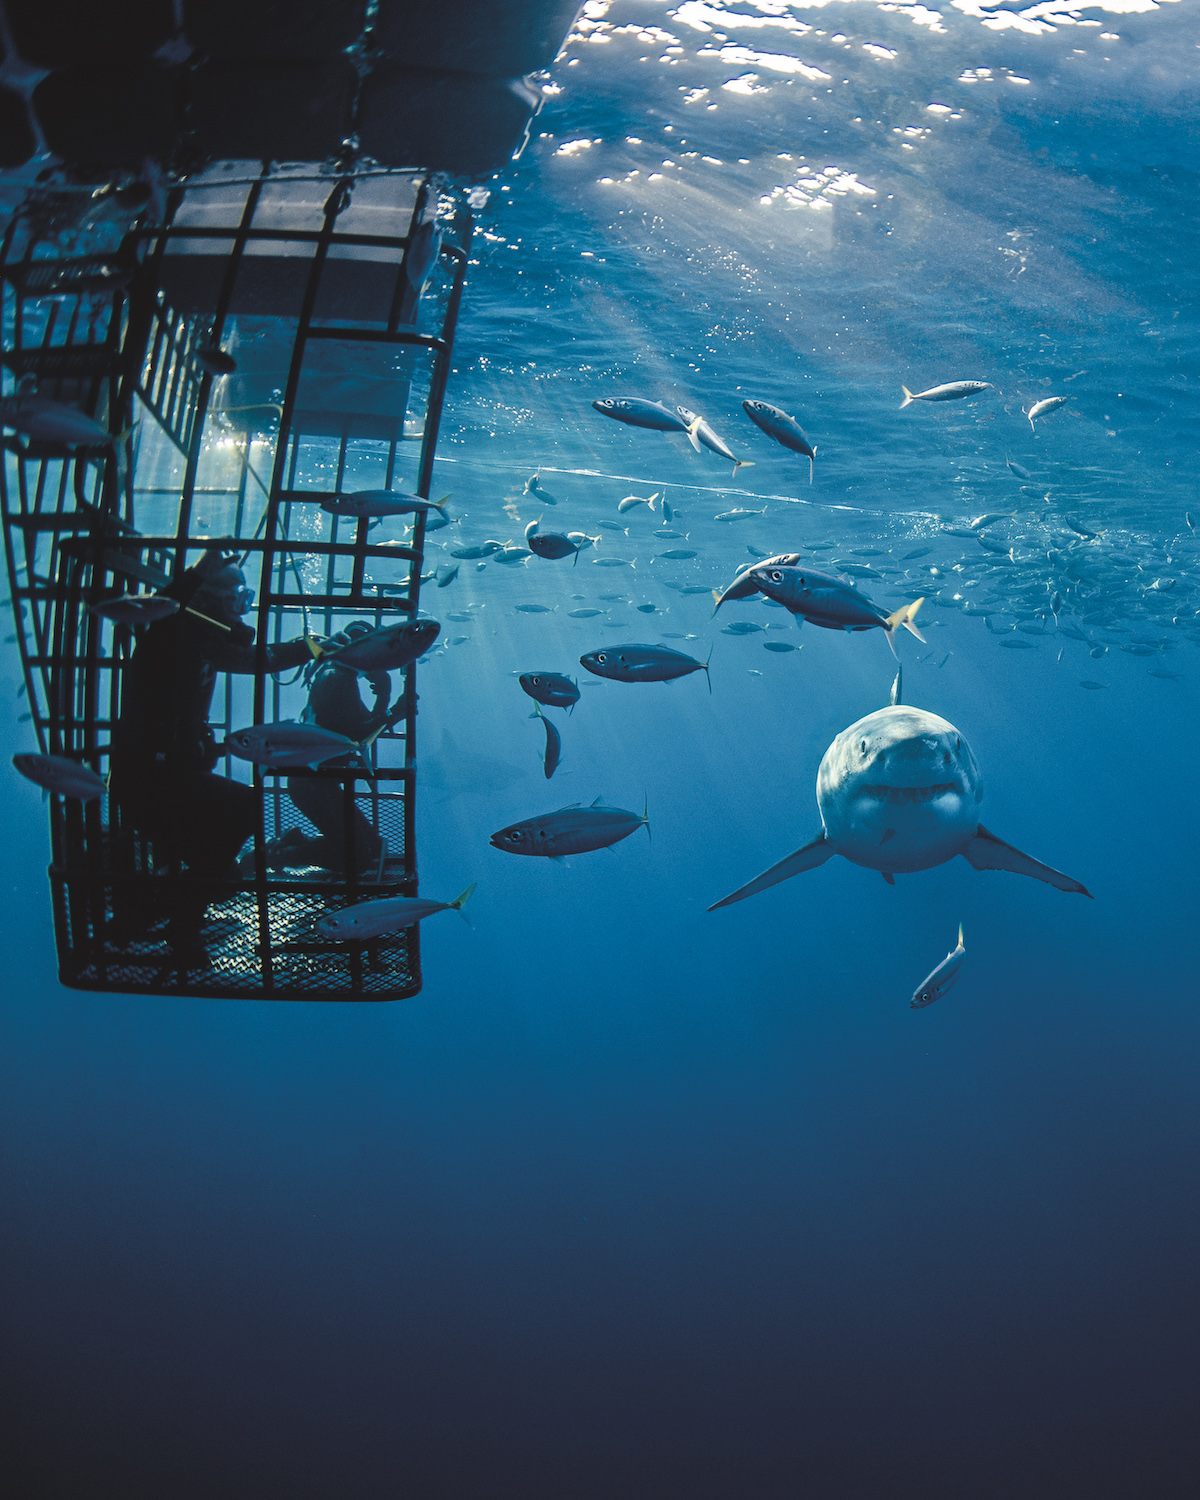 Guadalupe - Cage diving with great white sharks